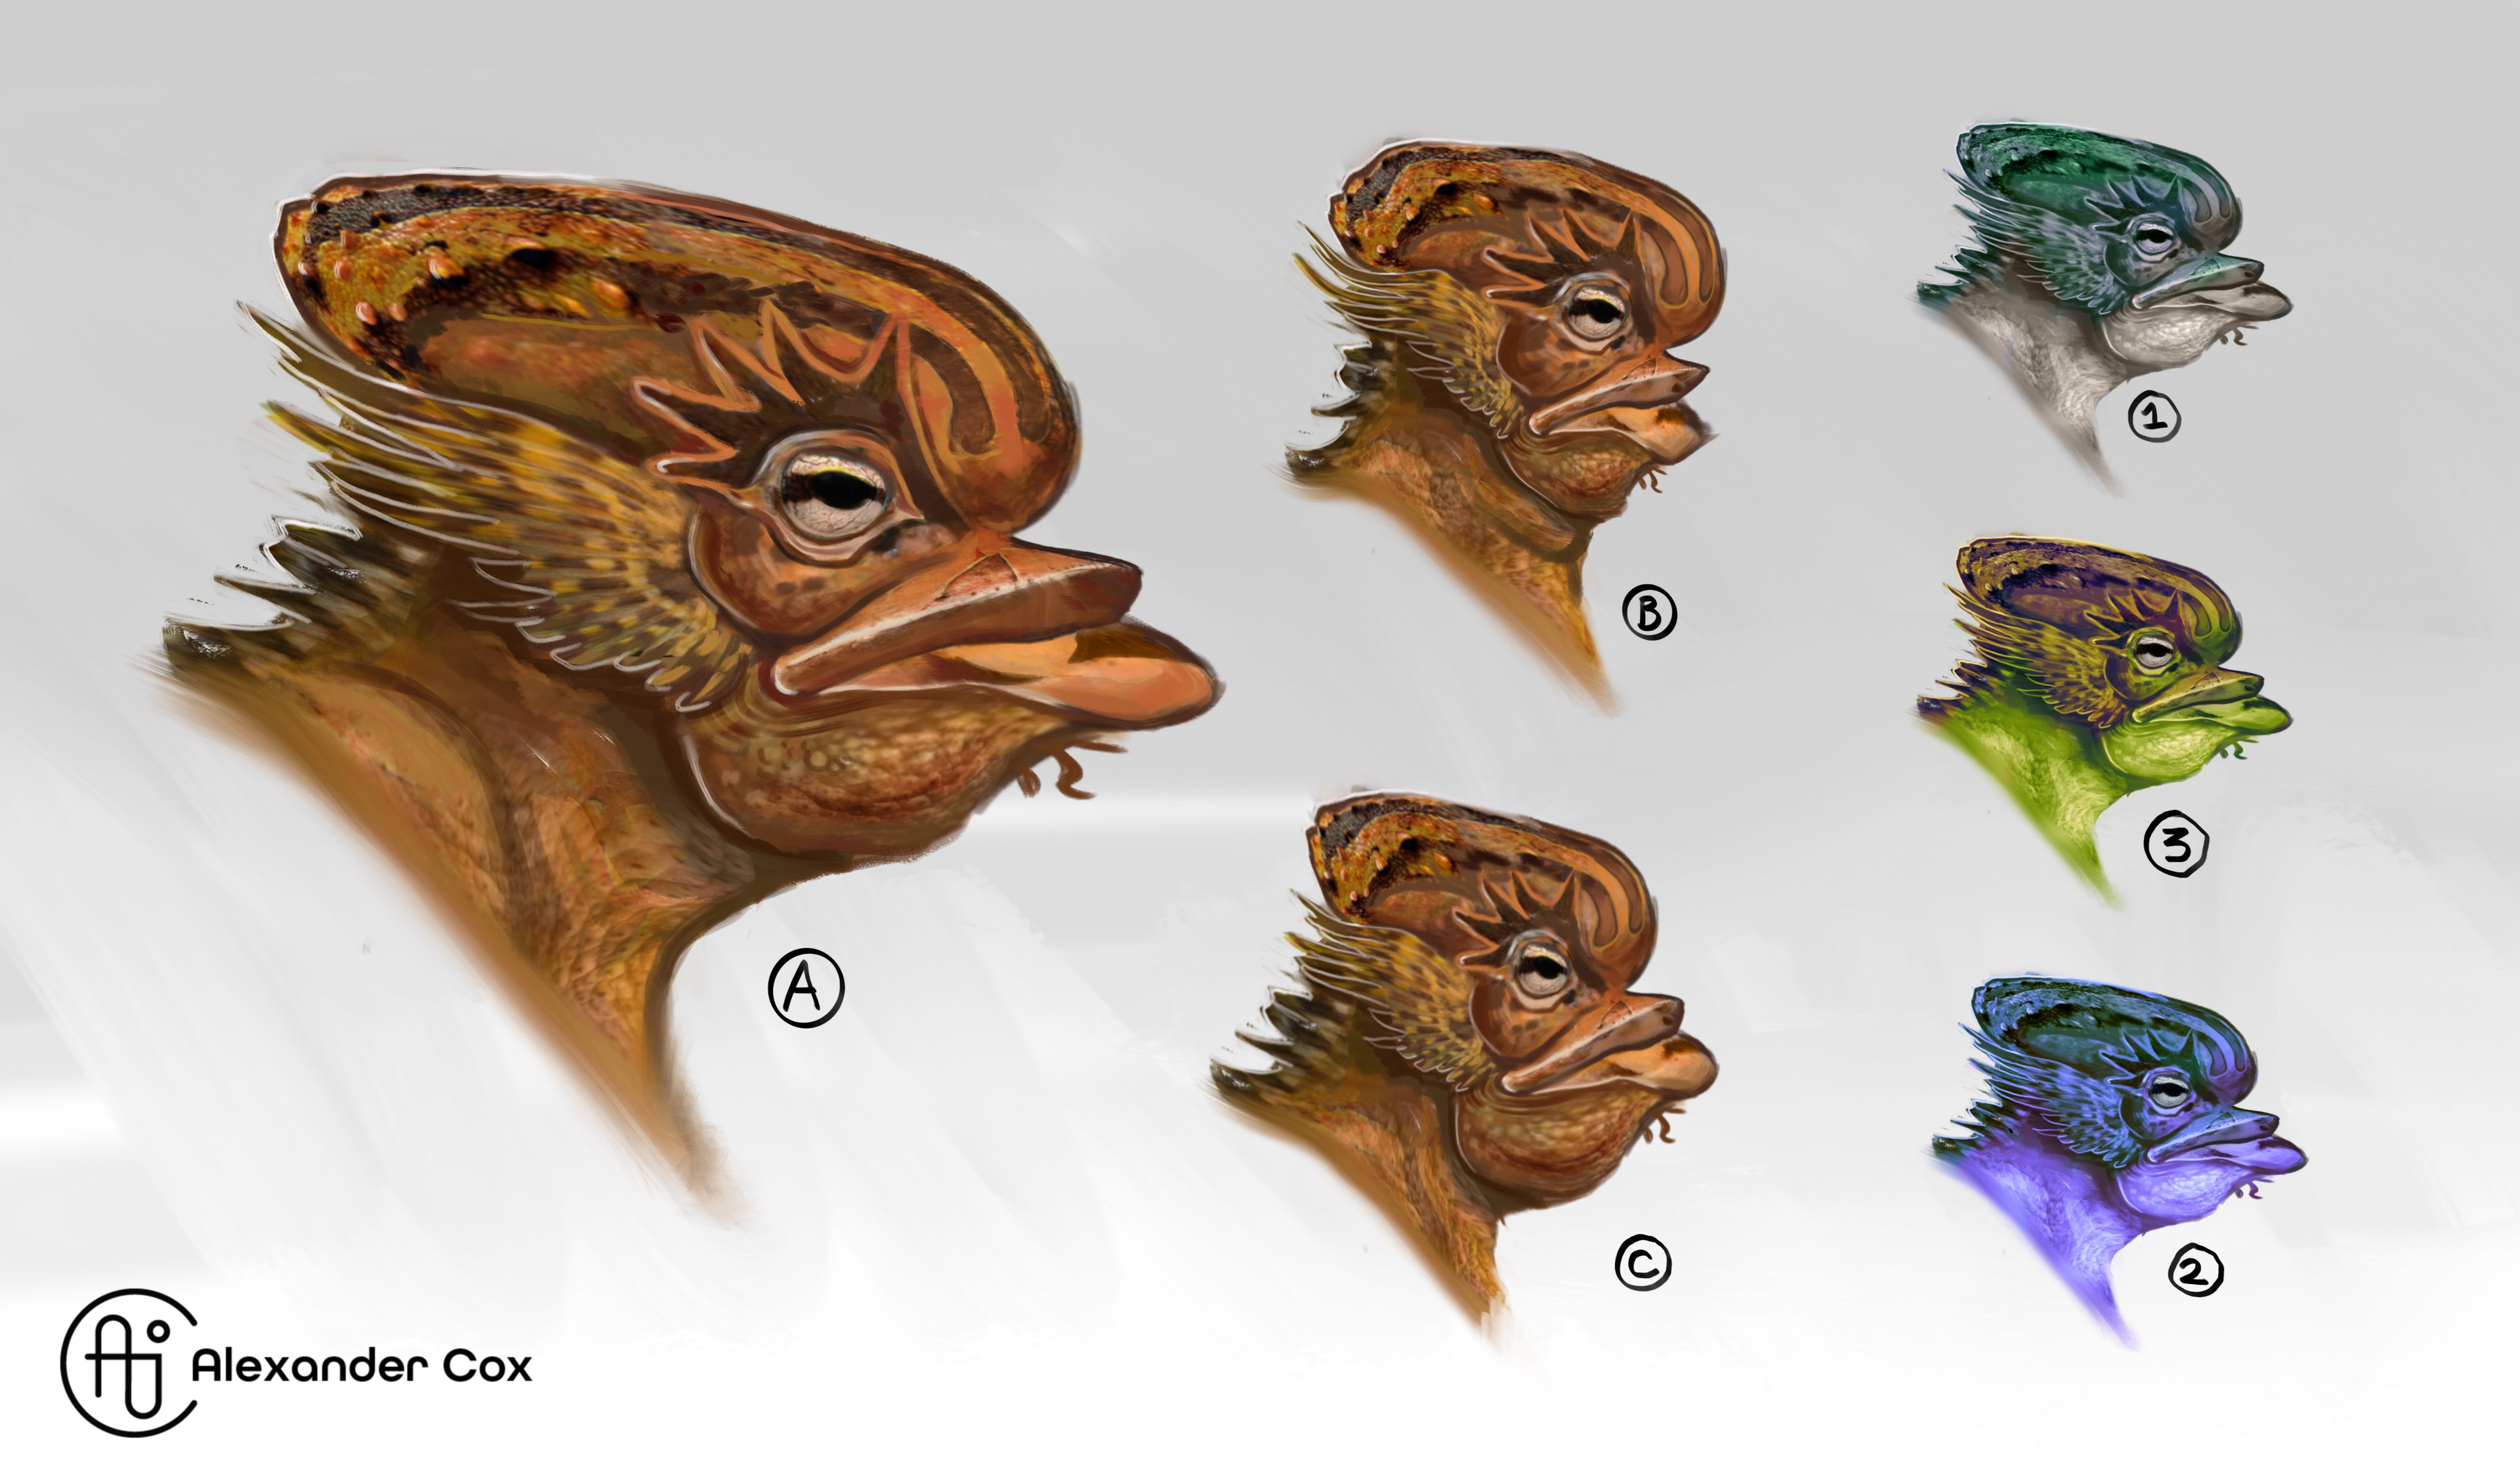 Head Exploration- When starting a design I often start with the head first. It is an easy way to establish the overall form language of an alien creature which can then be built upon from there